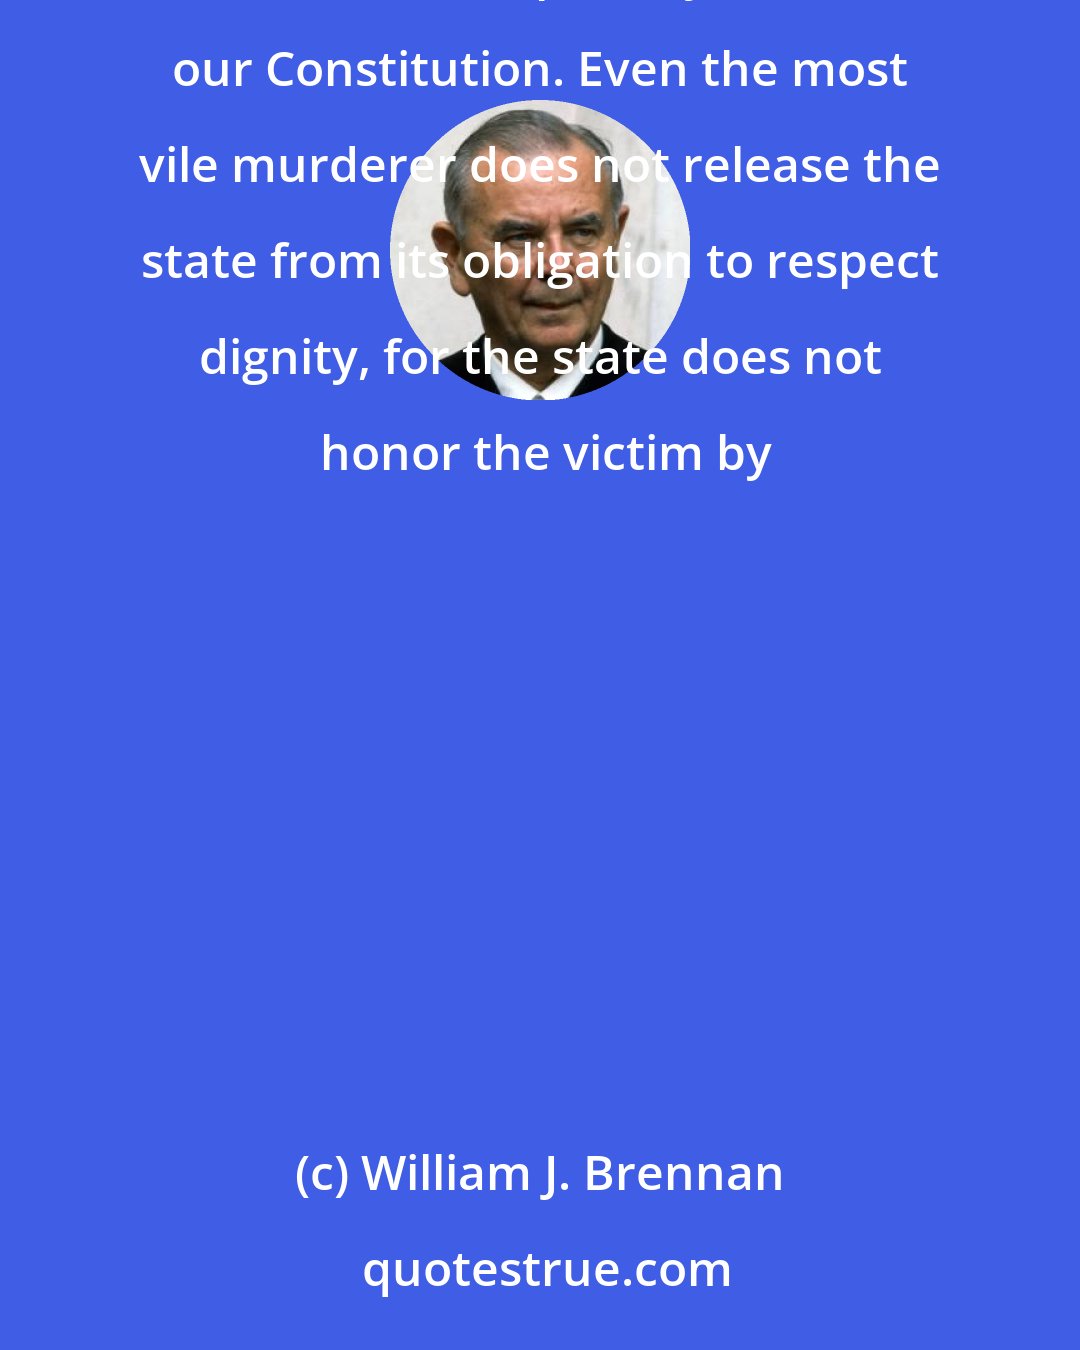 William J. Brennan: One area of law more than any other besmirches the constitutional vision of human dignity. . . . The barbaric death penalty violates our Constitution. Even the most vile murderer does not release the state from its obligation to respect dignity, for the state does not honor the victim by
	
		
      
	  
	  
	  
                  
      

            
   